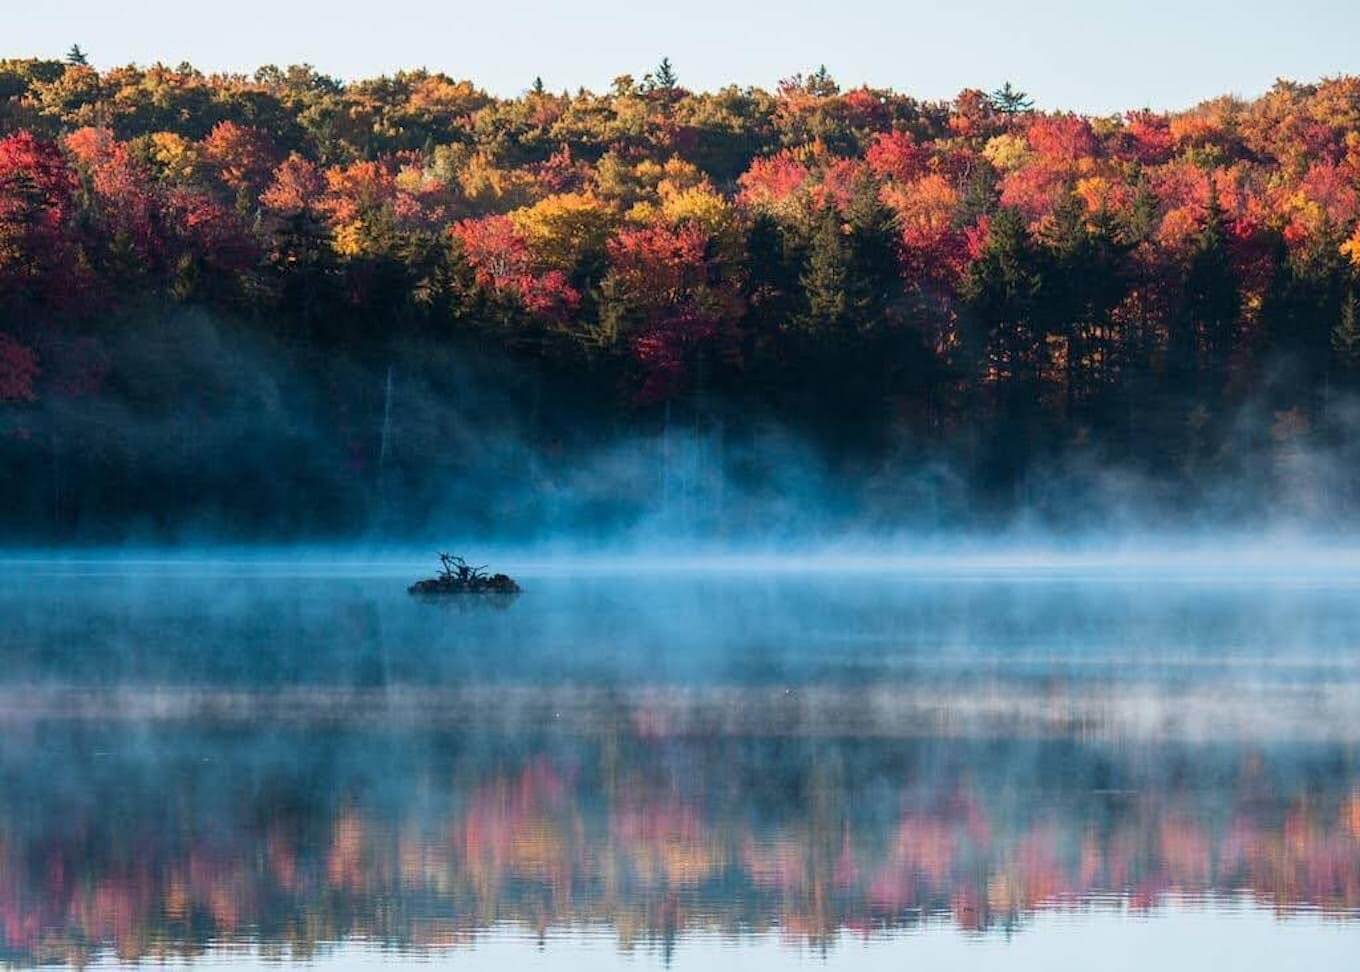 A forest photography scene featuring fall foliage and mist rising off of a nearby lake.